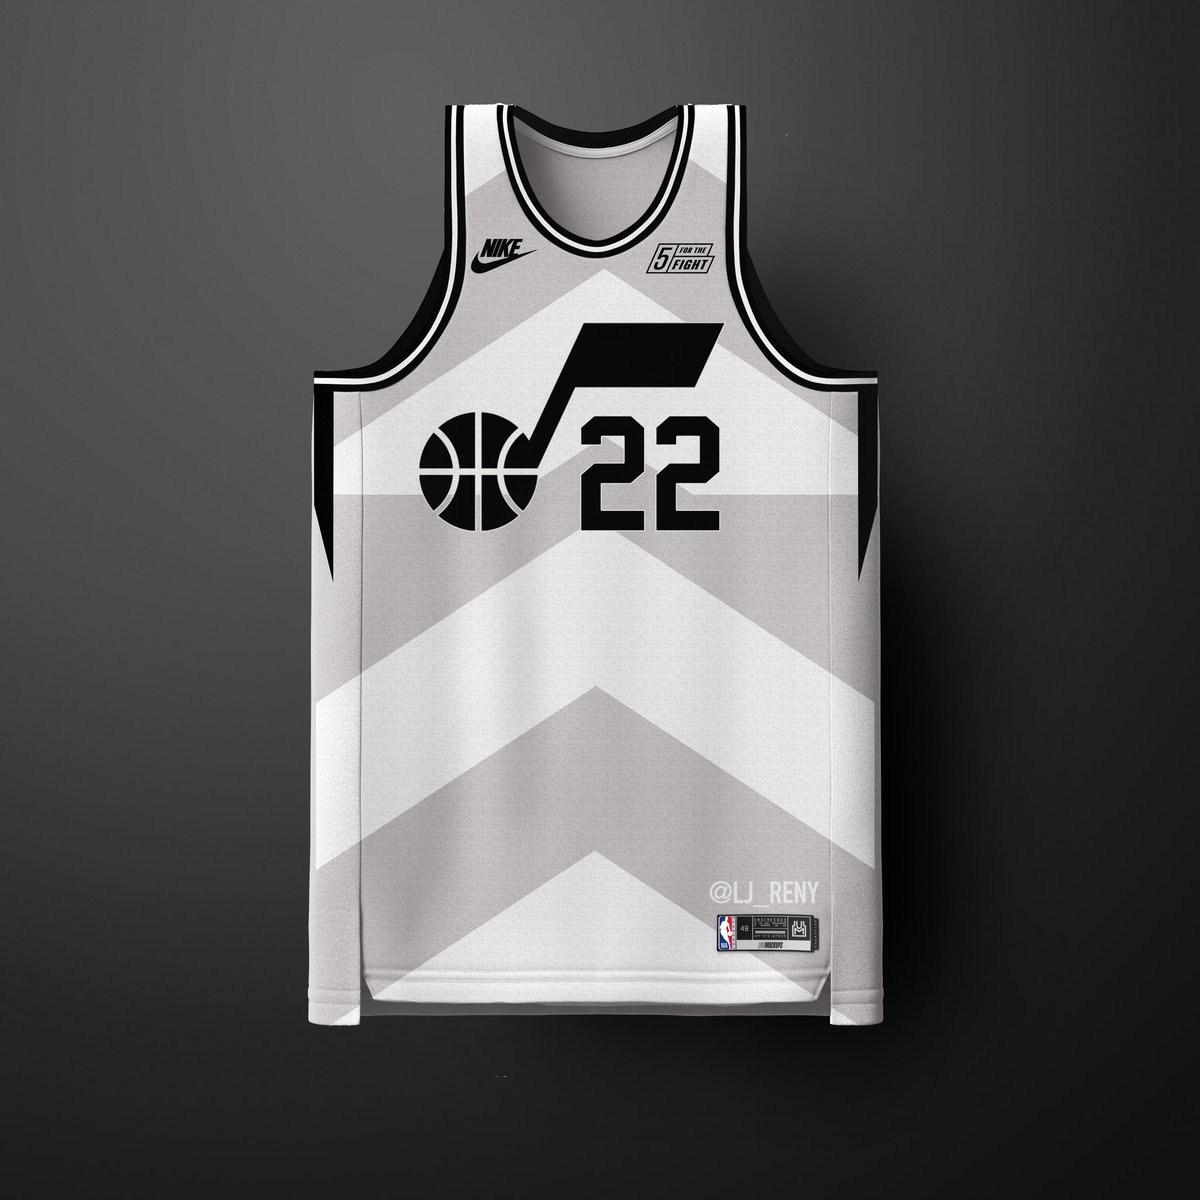 If Ryan Smith would have gotten his way with the Jazz only utilizing Black and White… inspired by a recent video that Ryan put out about new Jazz news! What do you think?